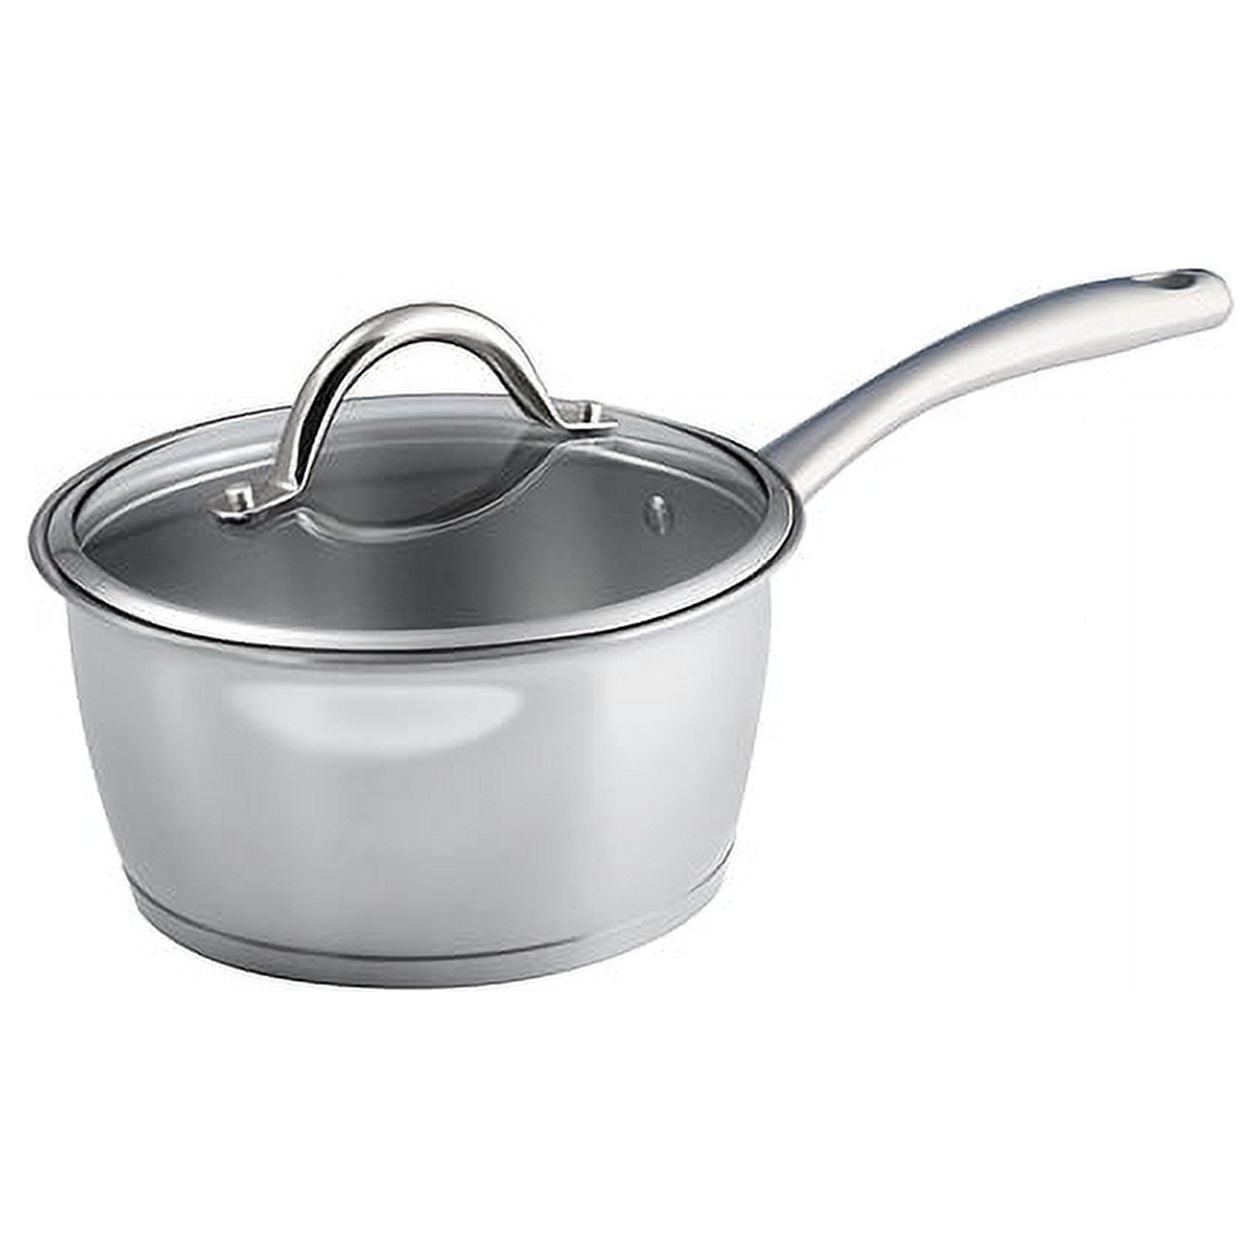 Glendaveny Tri-Ply Stainless Steel Sauce Pan with Lid, 3-Quart Saucepan  Sauce Pot Multipurpose Use for Home Kitchen or Restaurant - Kitchen Cookware,  Induction Pot, Dishwasher Safe & Oven Safe 